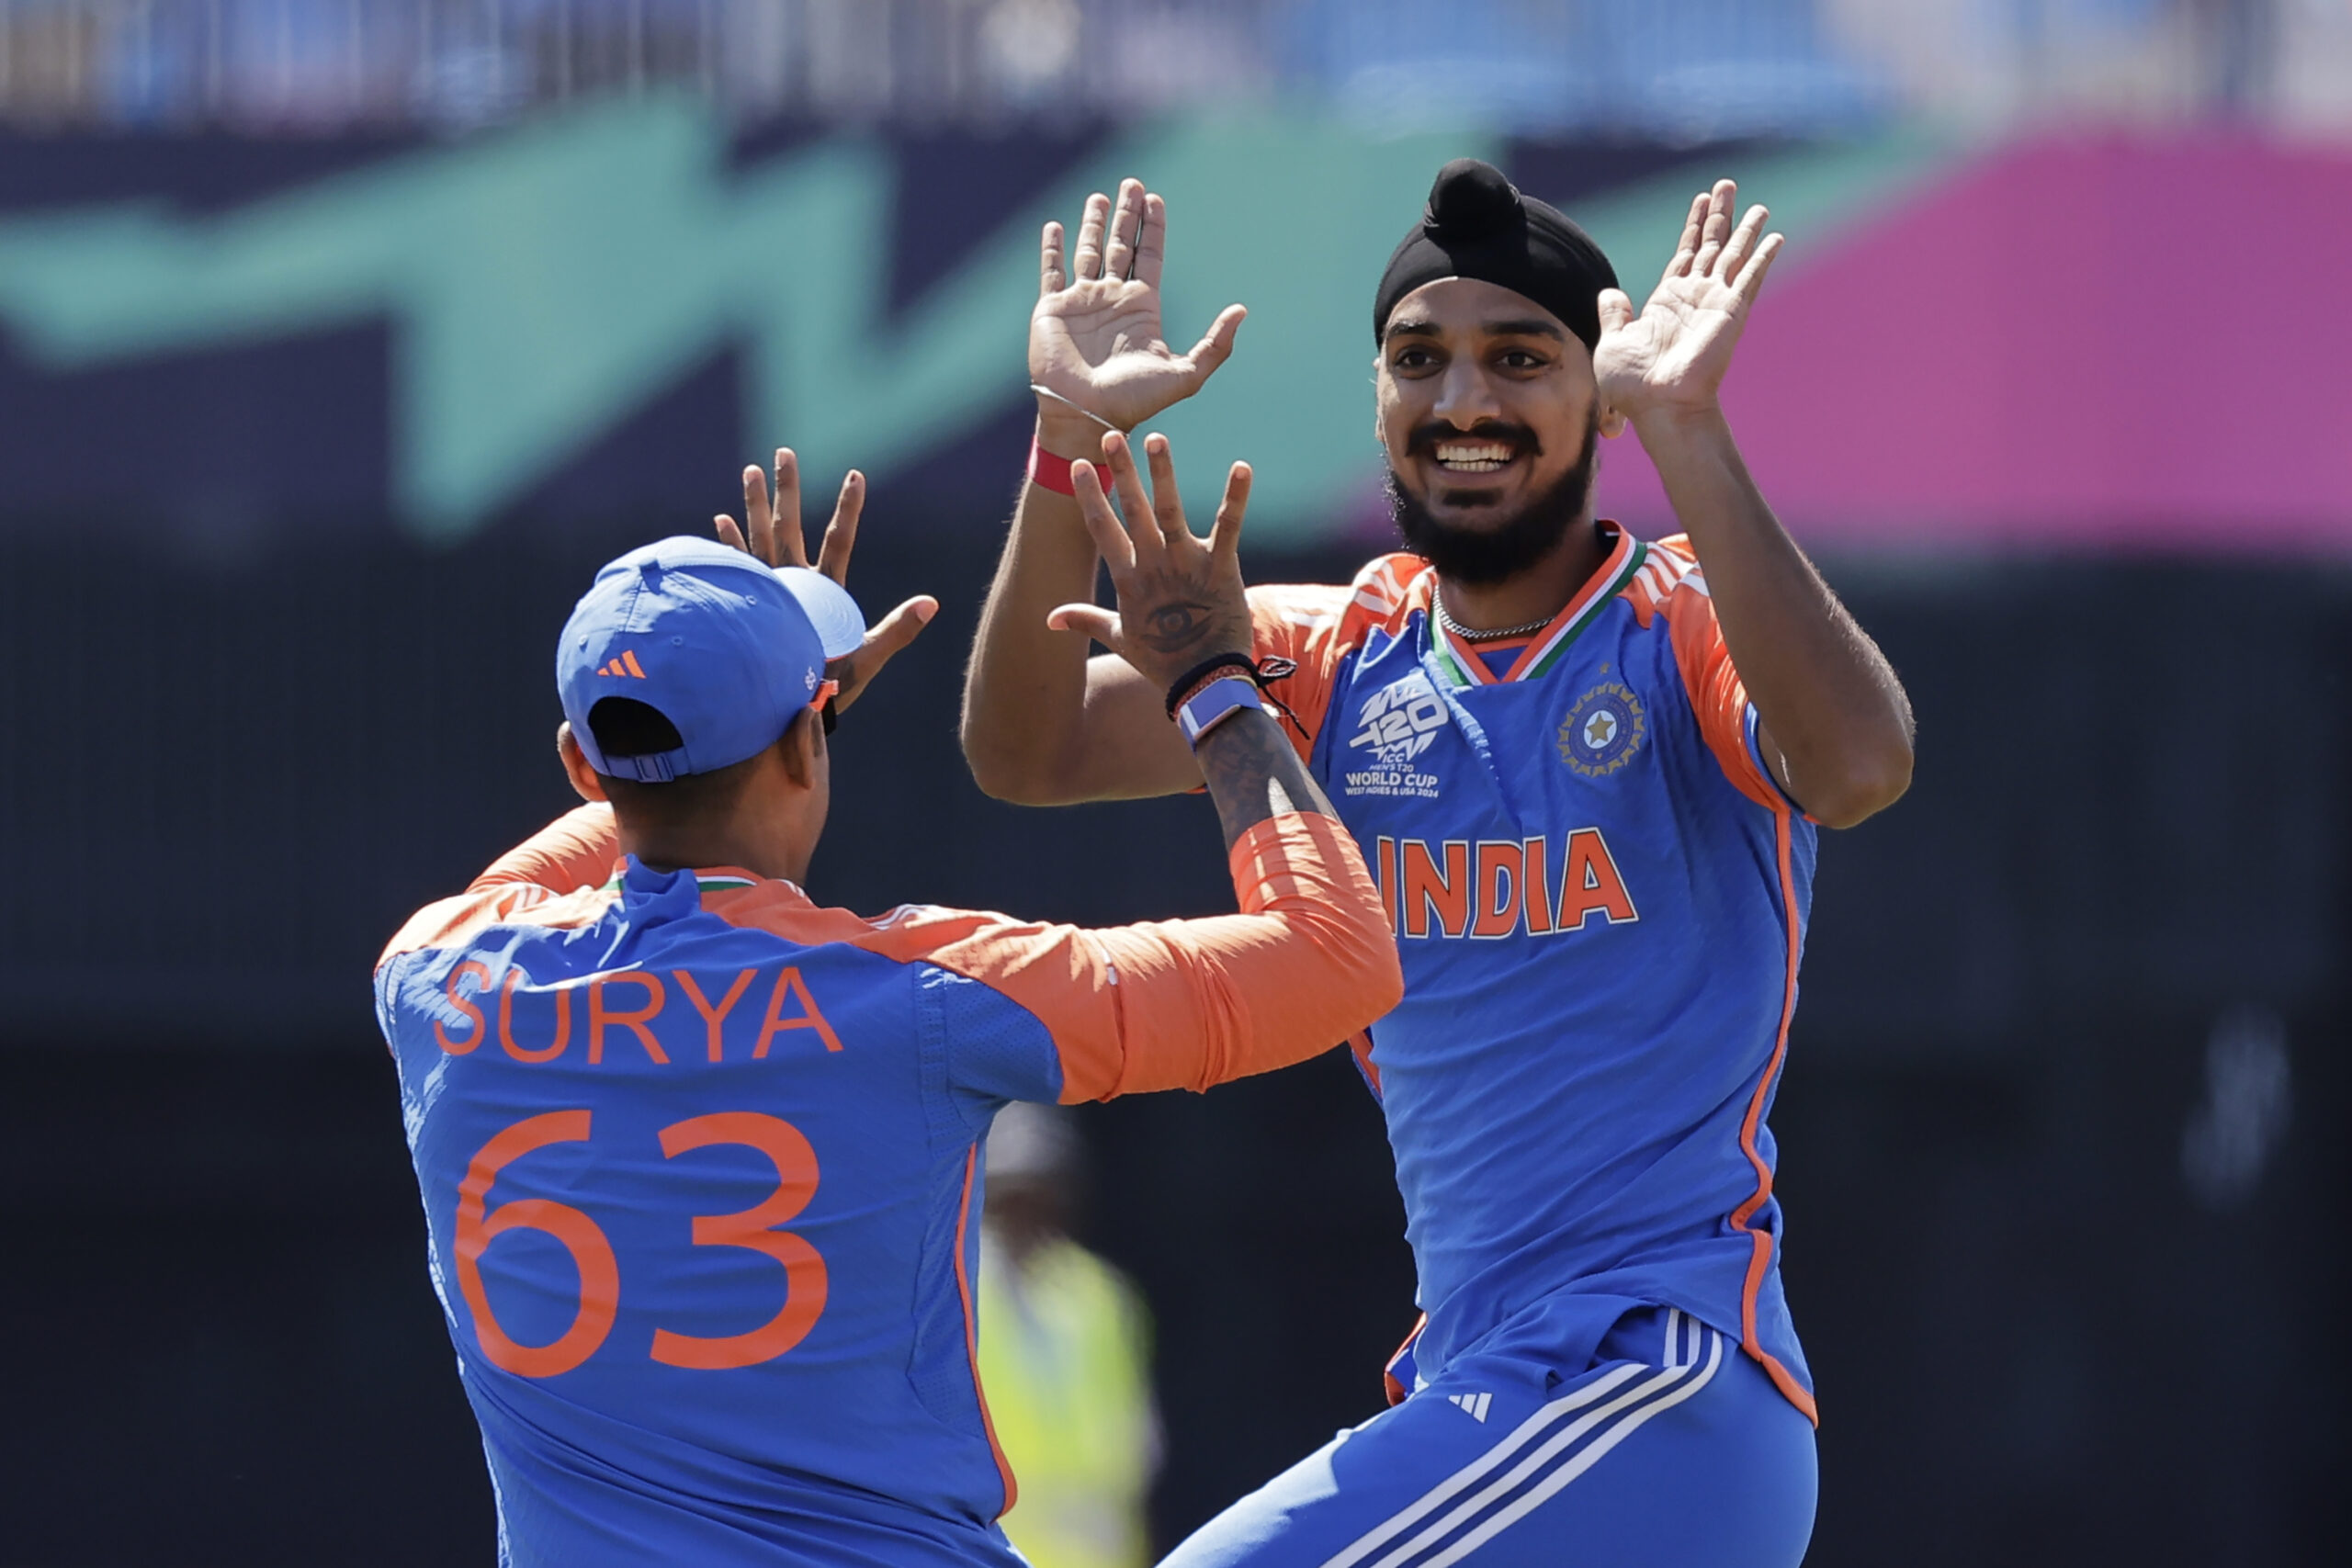 India advances to Super 8 in ICC T20 World Cup with 7-wicket win over USA